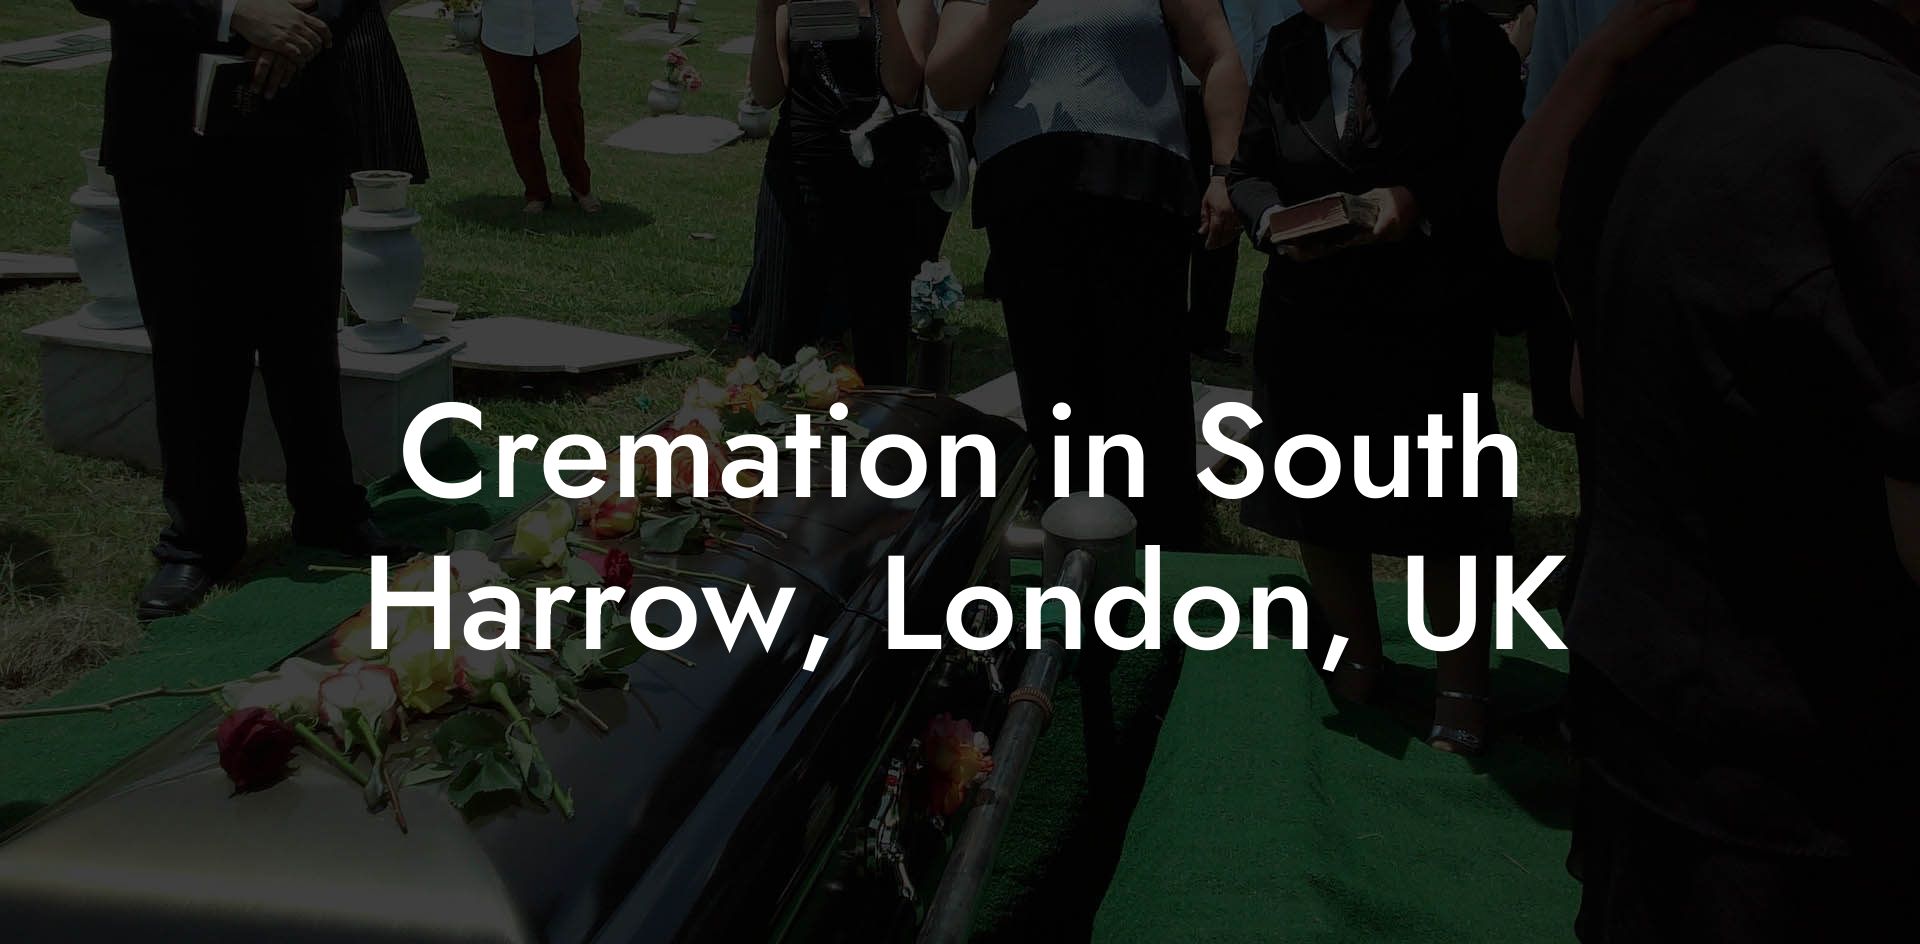 Cremation in South Harrow, London, UK